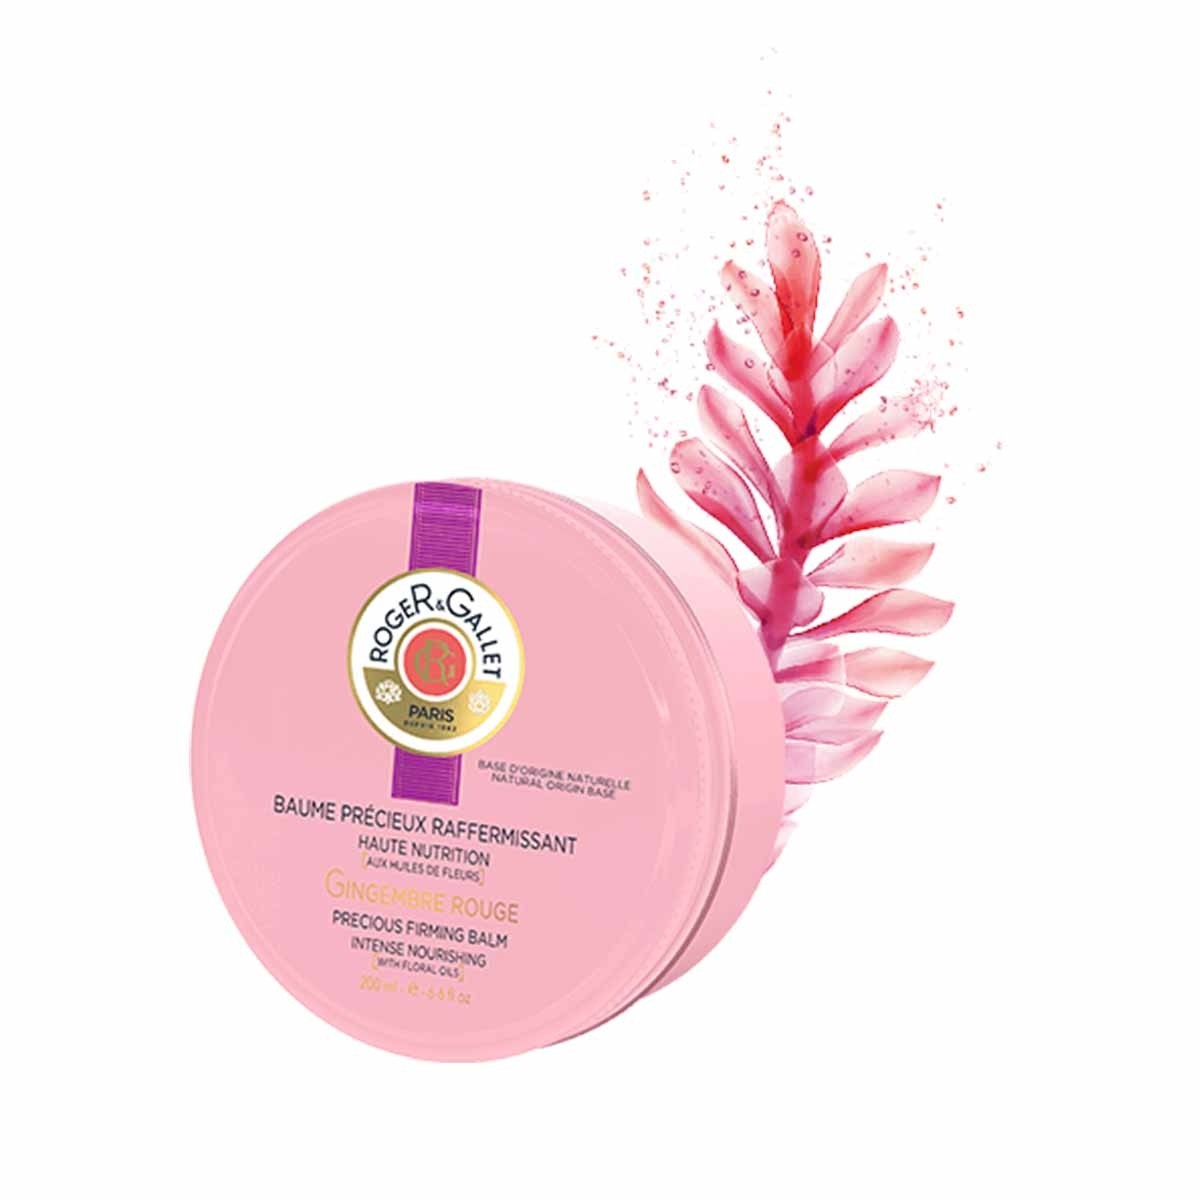 Roger & Gallet Gingembre Rouge Body Balm 200Ml